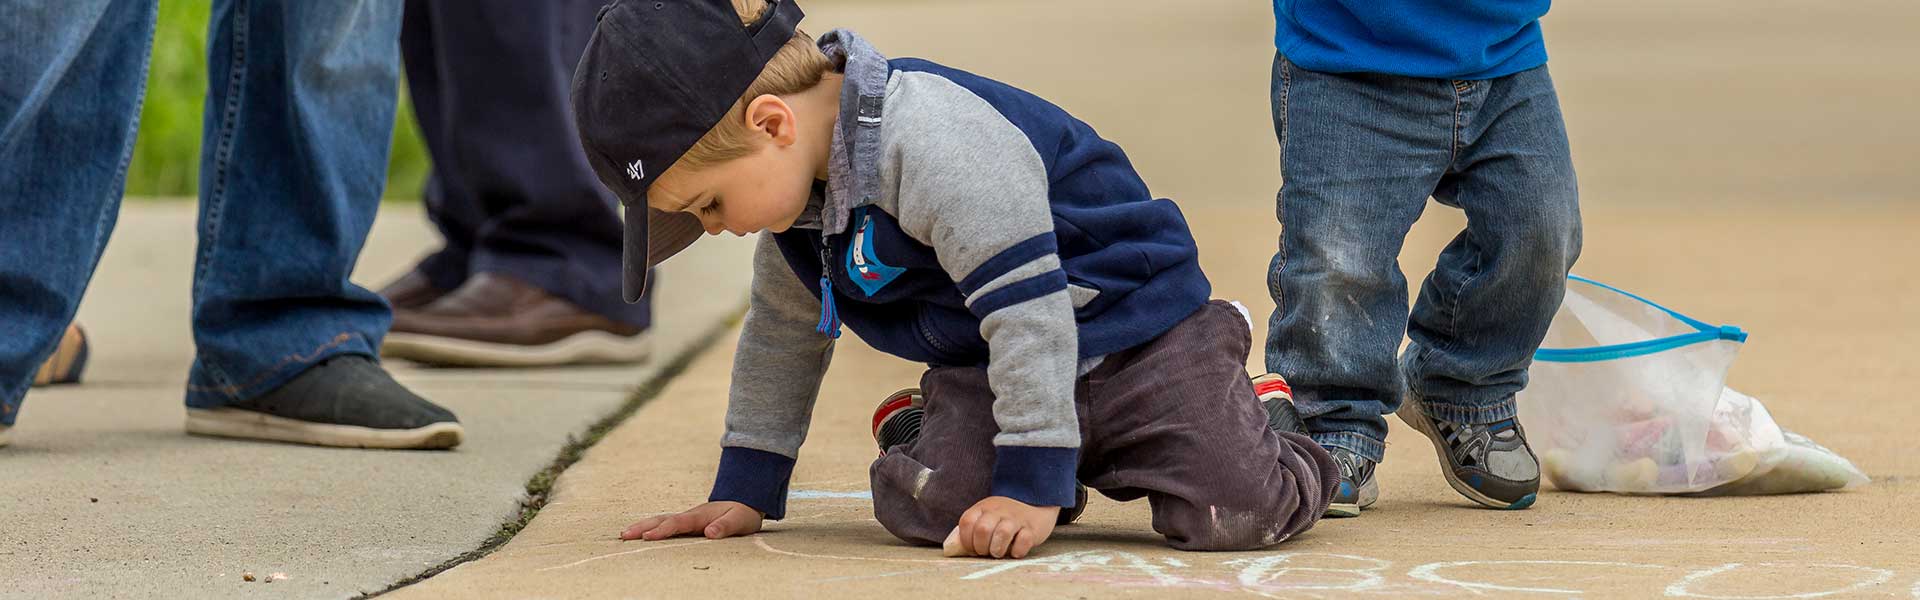 child drawing with chalk on the ground